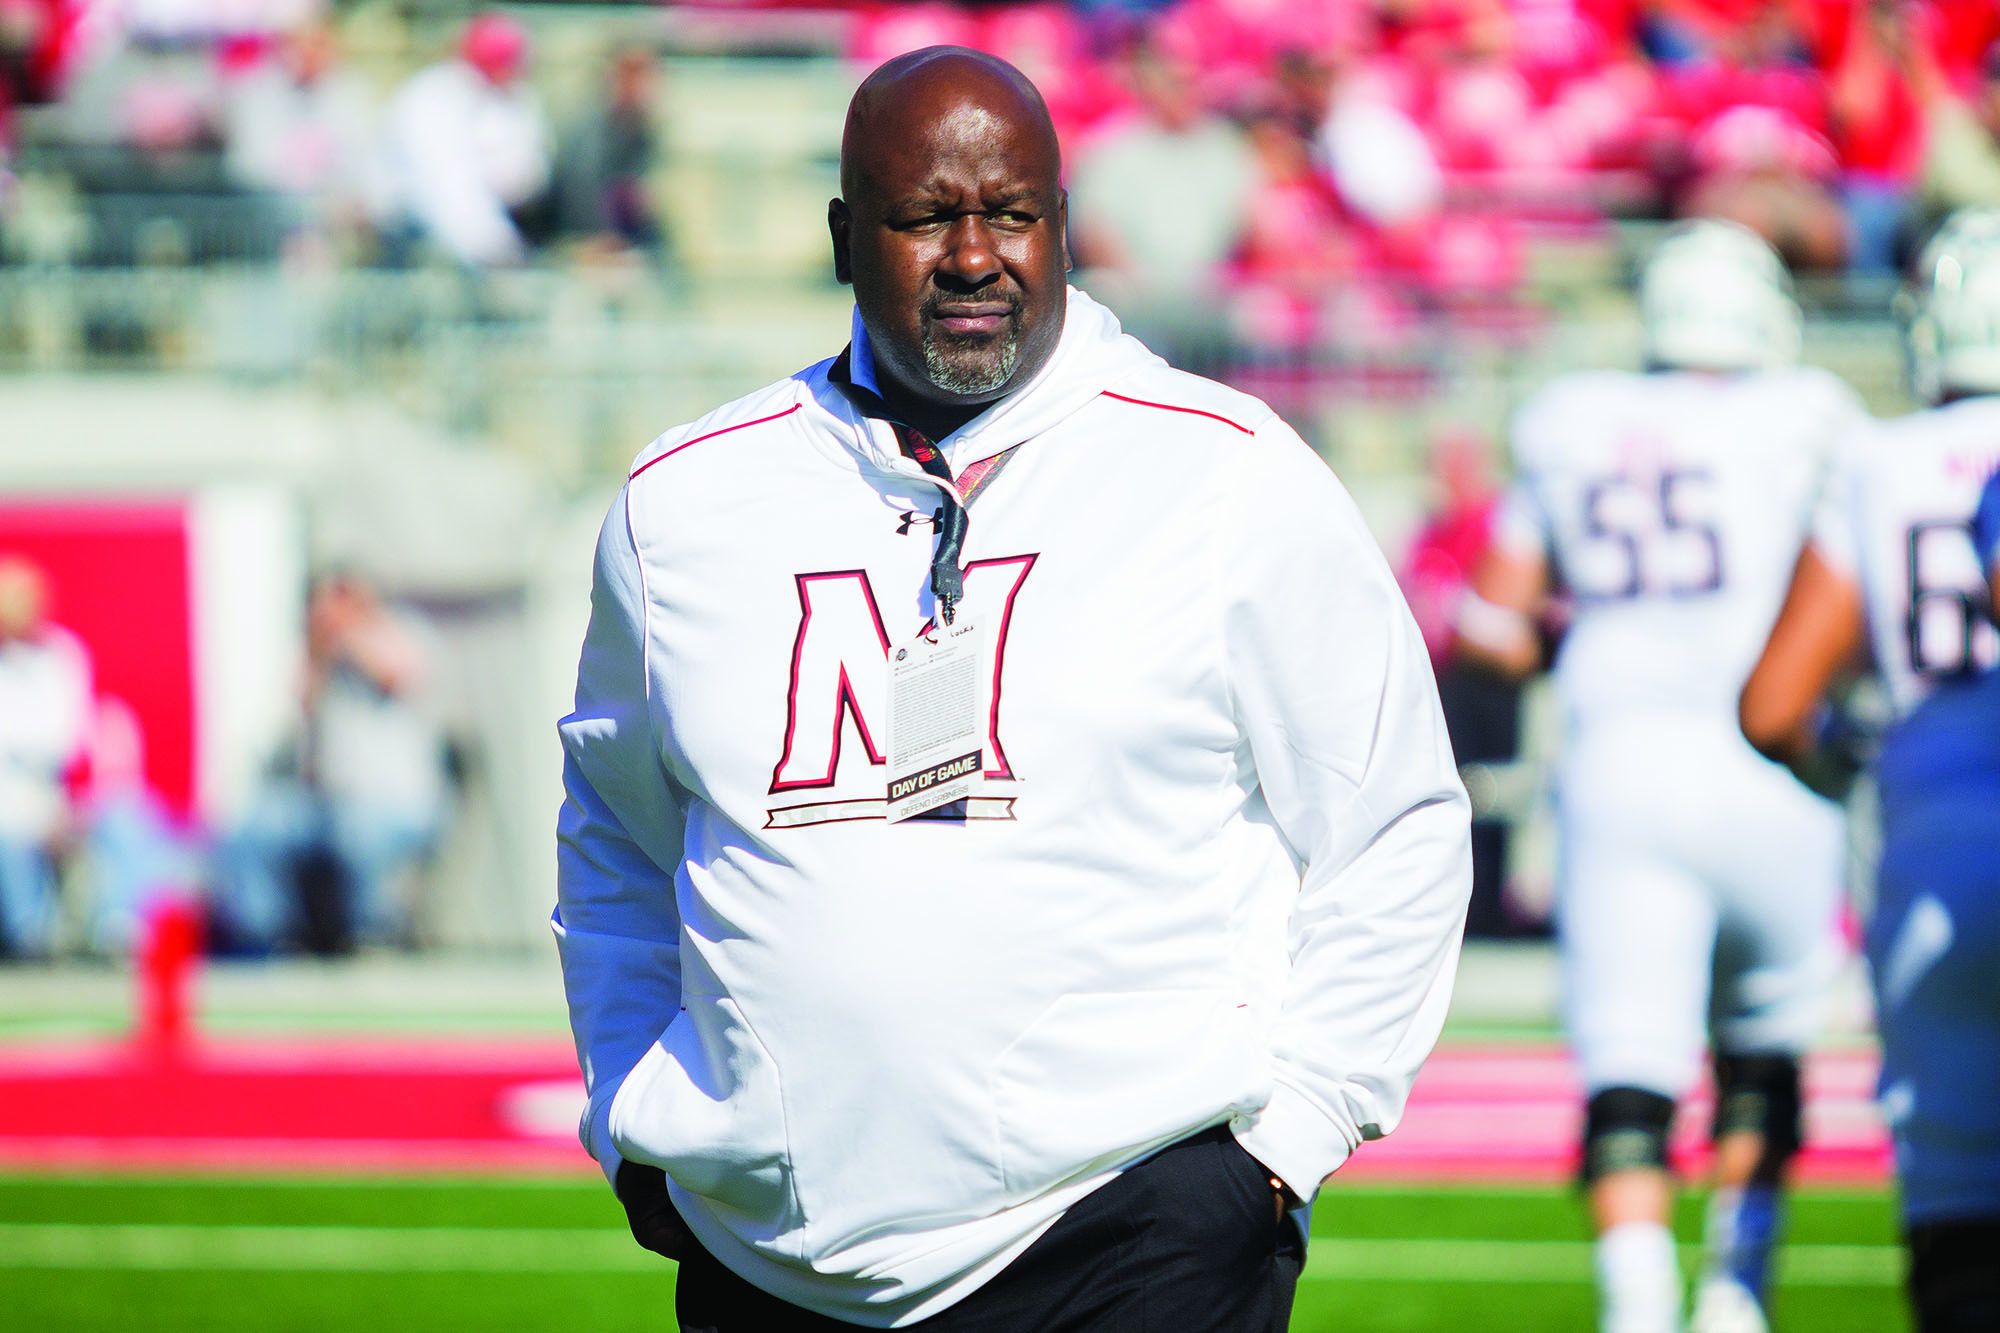 Mike Locksley Is A Frontrunner To Coach Maryland Football But Some Boosters Aren’t Convinced